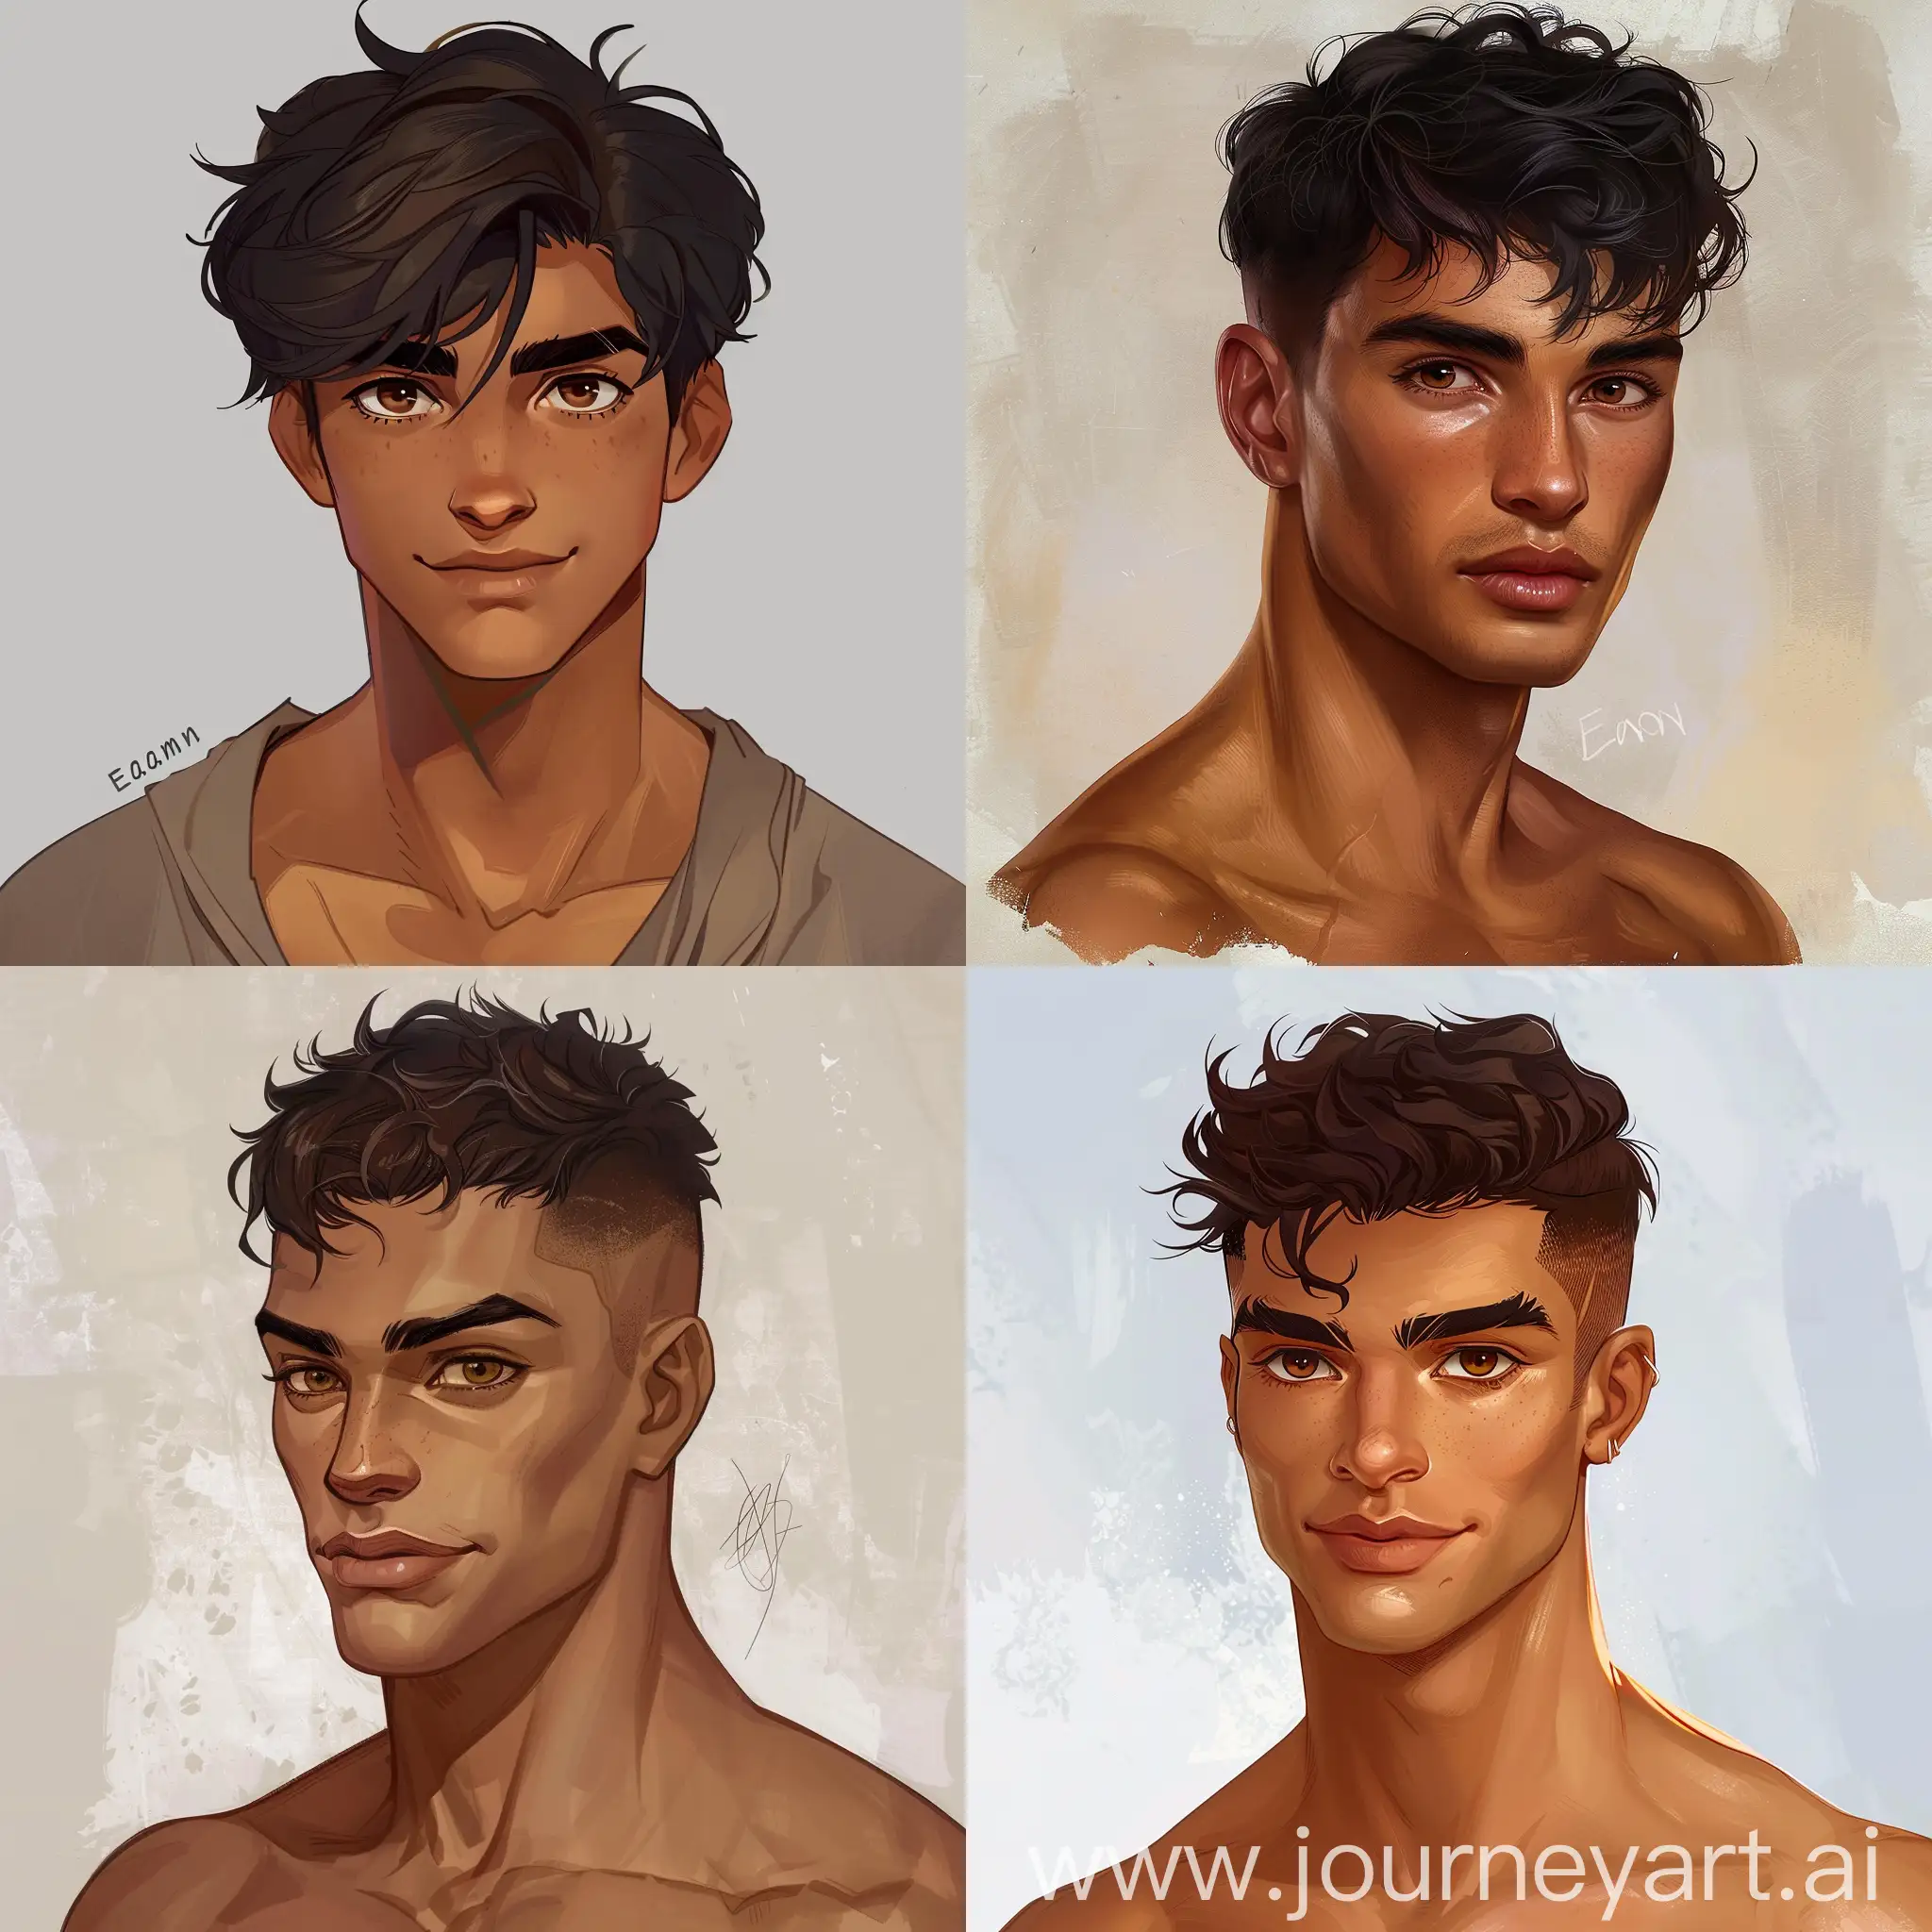 Eamon is determined and caring, with a quiet strength. He admires strength and seeks to protect those he cares about. As a demigod, Eamon possesses magical abilities that manifest when needed, powerful light magic . Lean build, very short textured dark hair, brown eyes, and caramel tan skin.